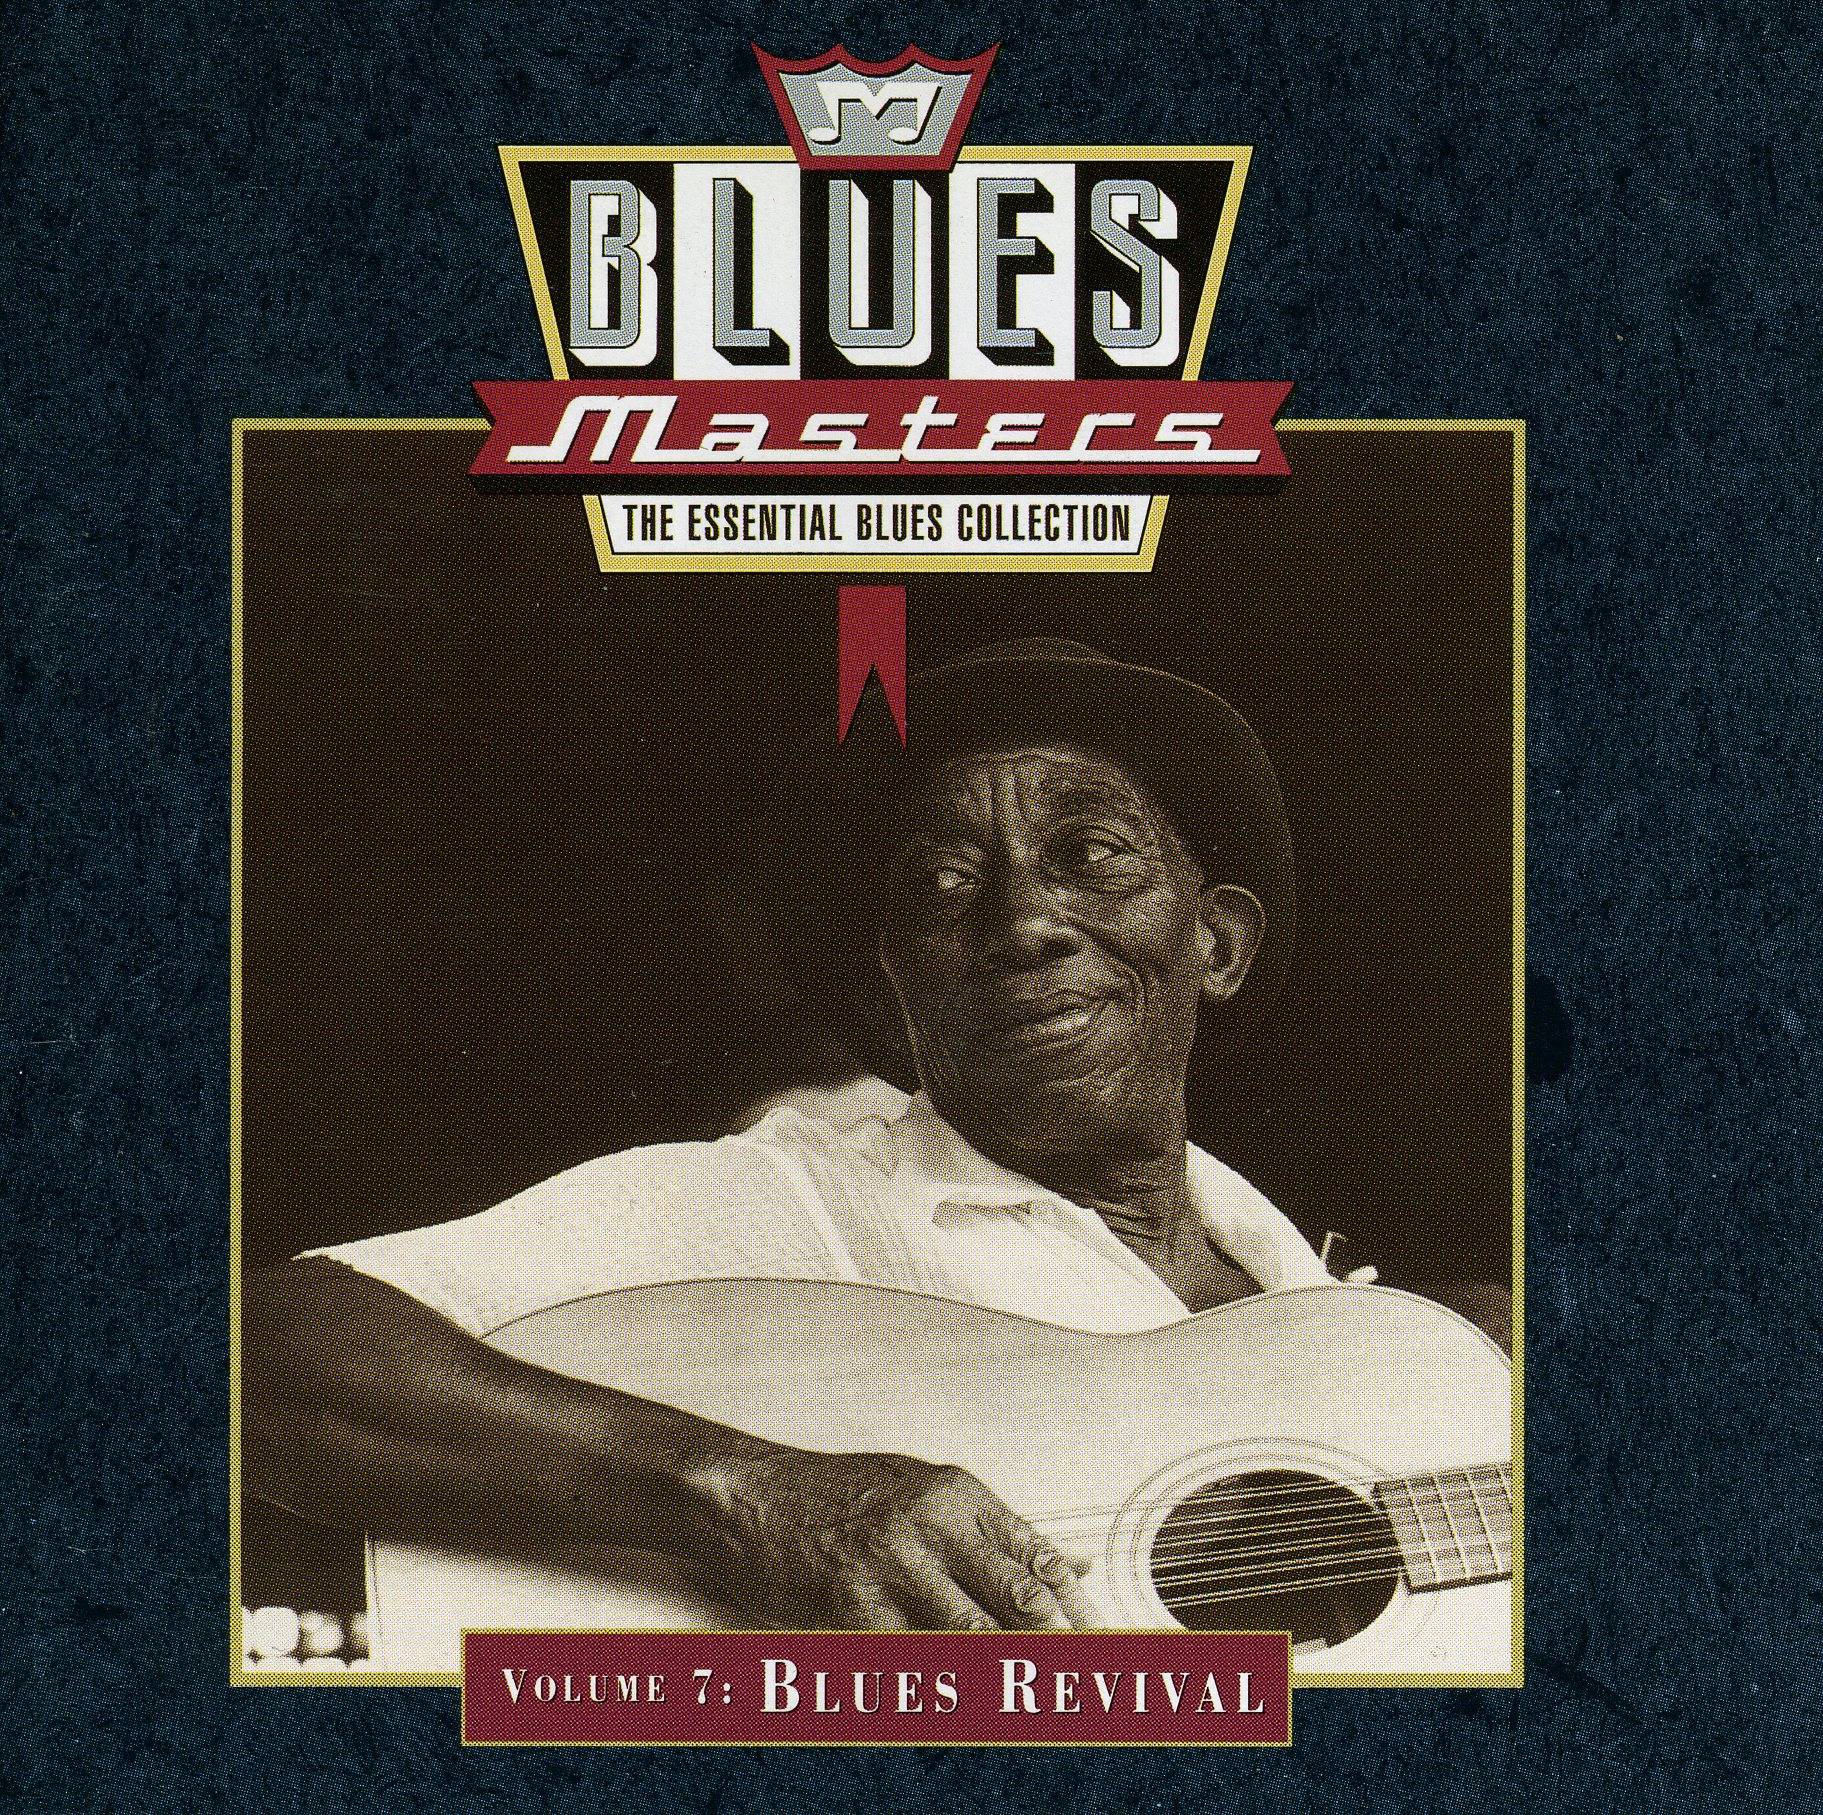 VA - Blues Masters - The Essential Blues Collection Volume 1 - 15 NZB only